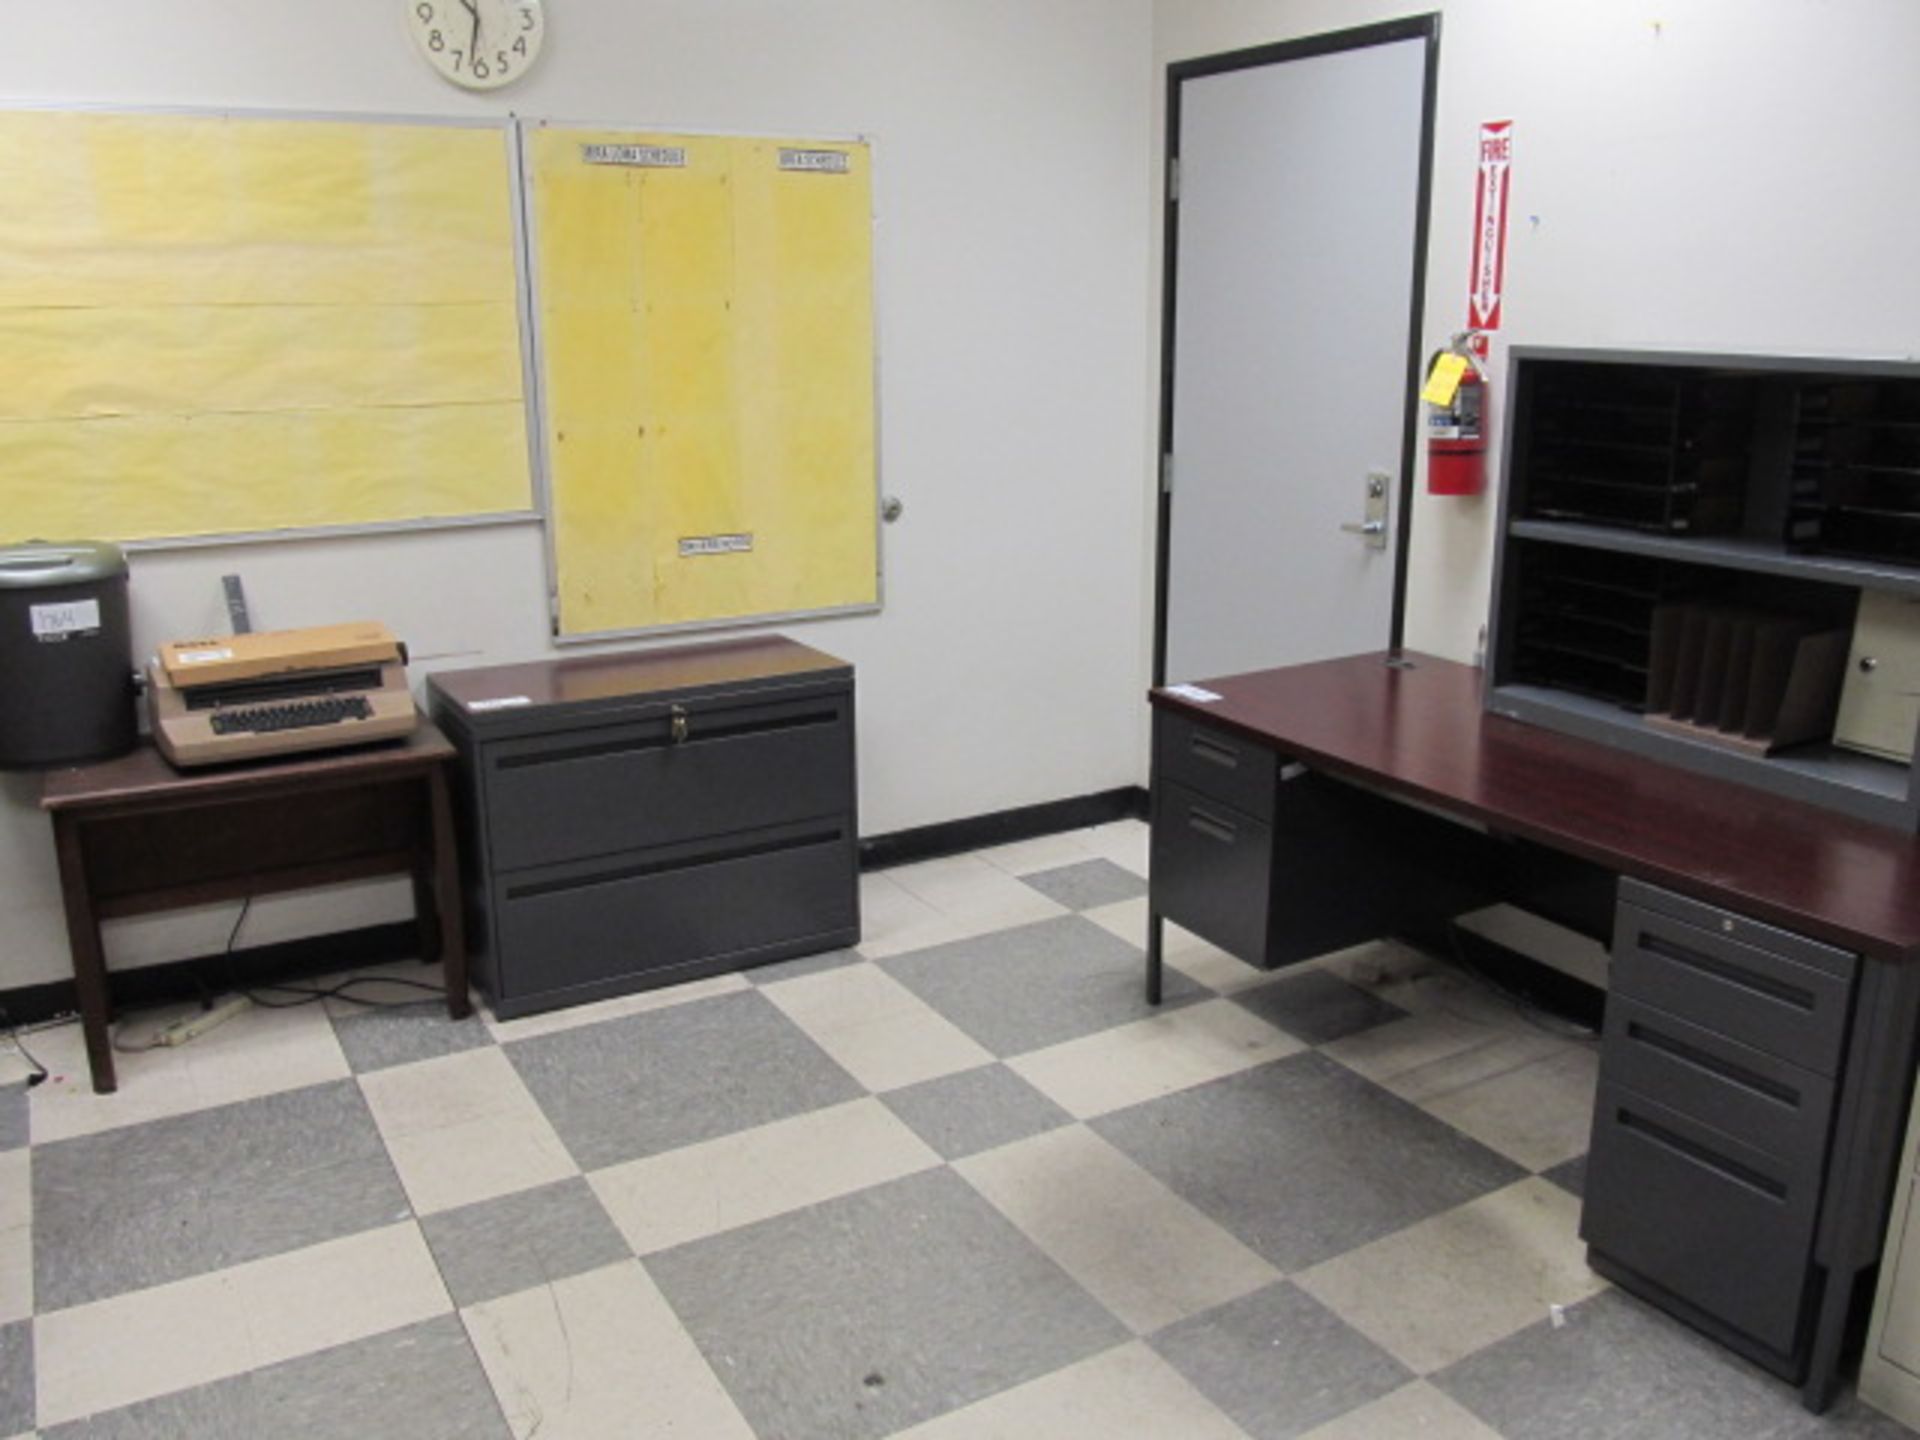 Lot Contents Of Office, (1) Metal Desk, (2) Metal 2 Drawer Lateral File Cabinets, (1) IBM